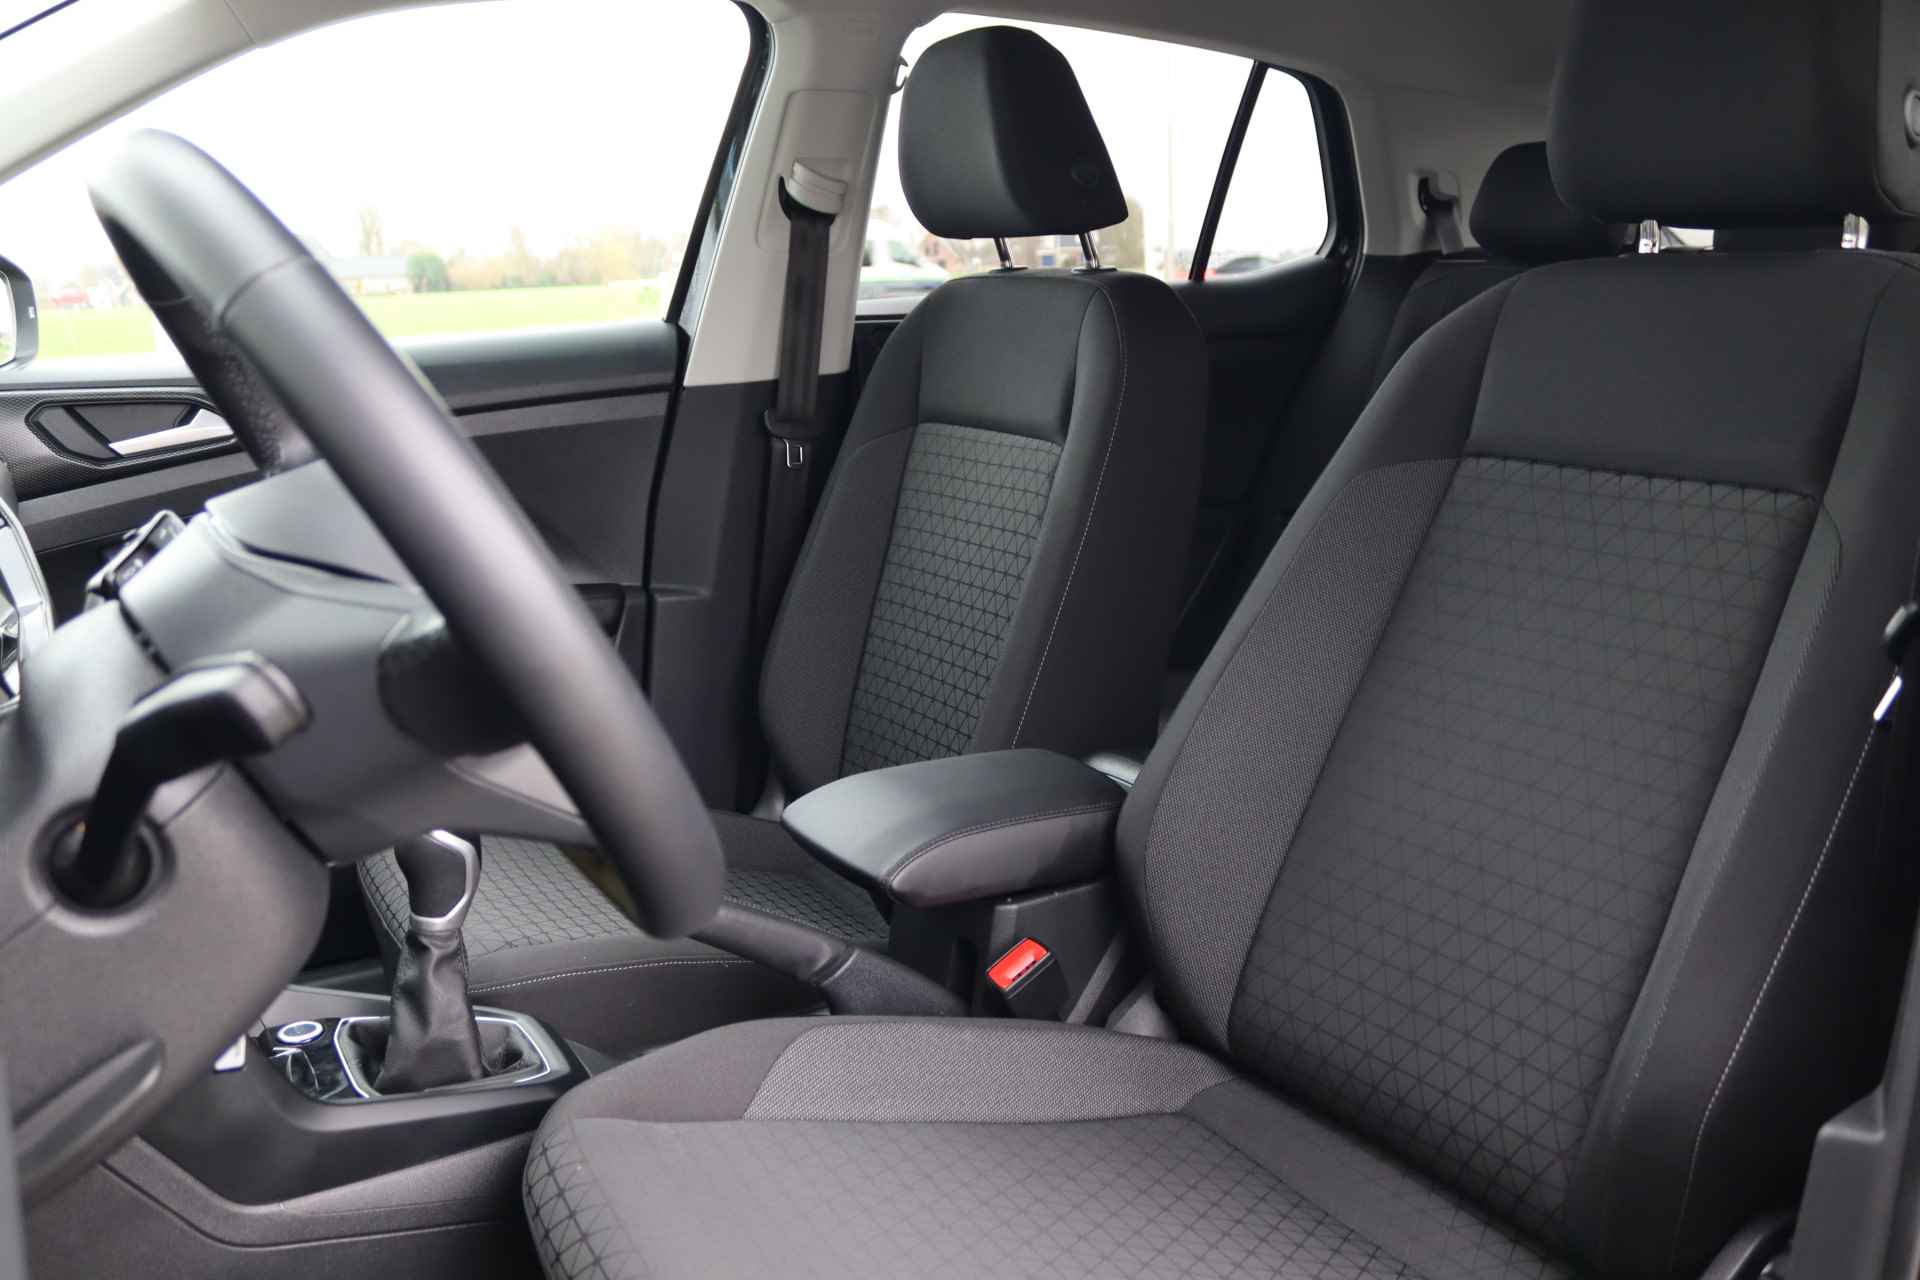 Volkswagen T-Cross 1.0 TSI 95 pk Life | App-connect  | PDC voor & achter | 16" LM | Adaptive Cruise - 15/38